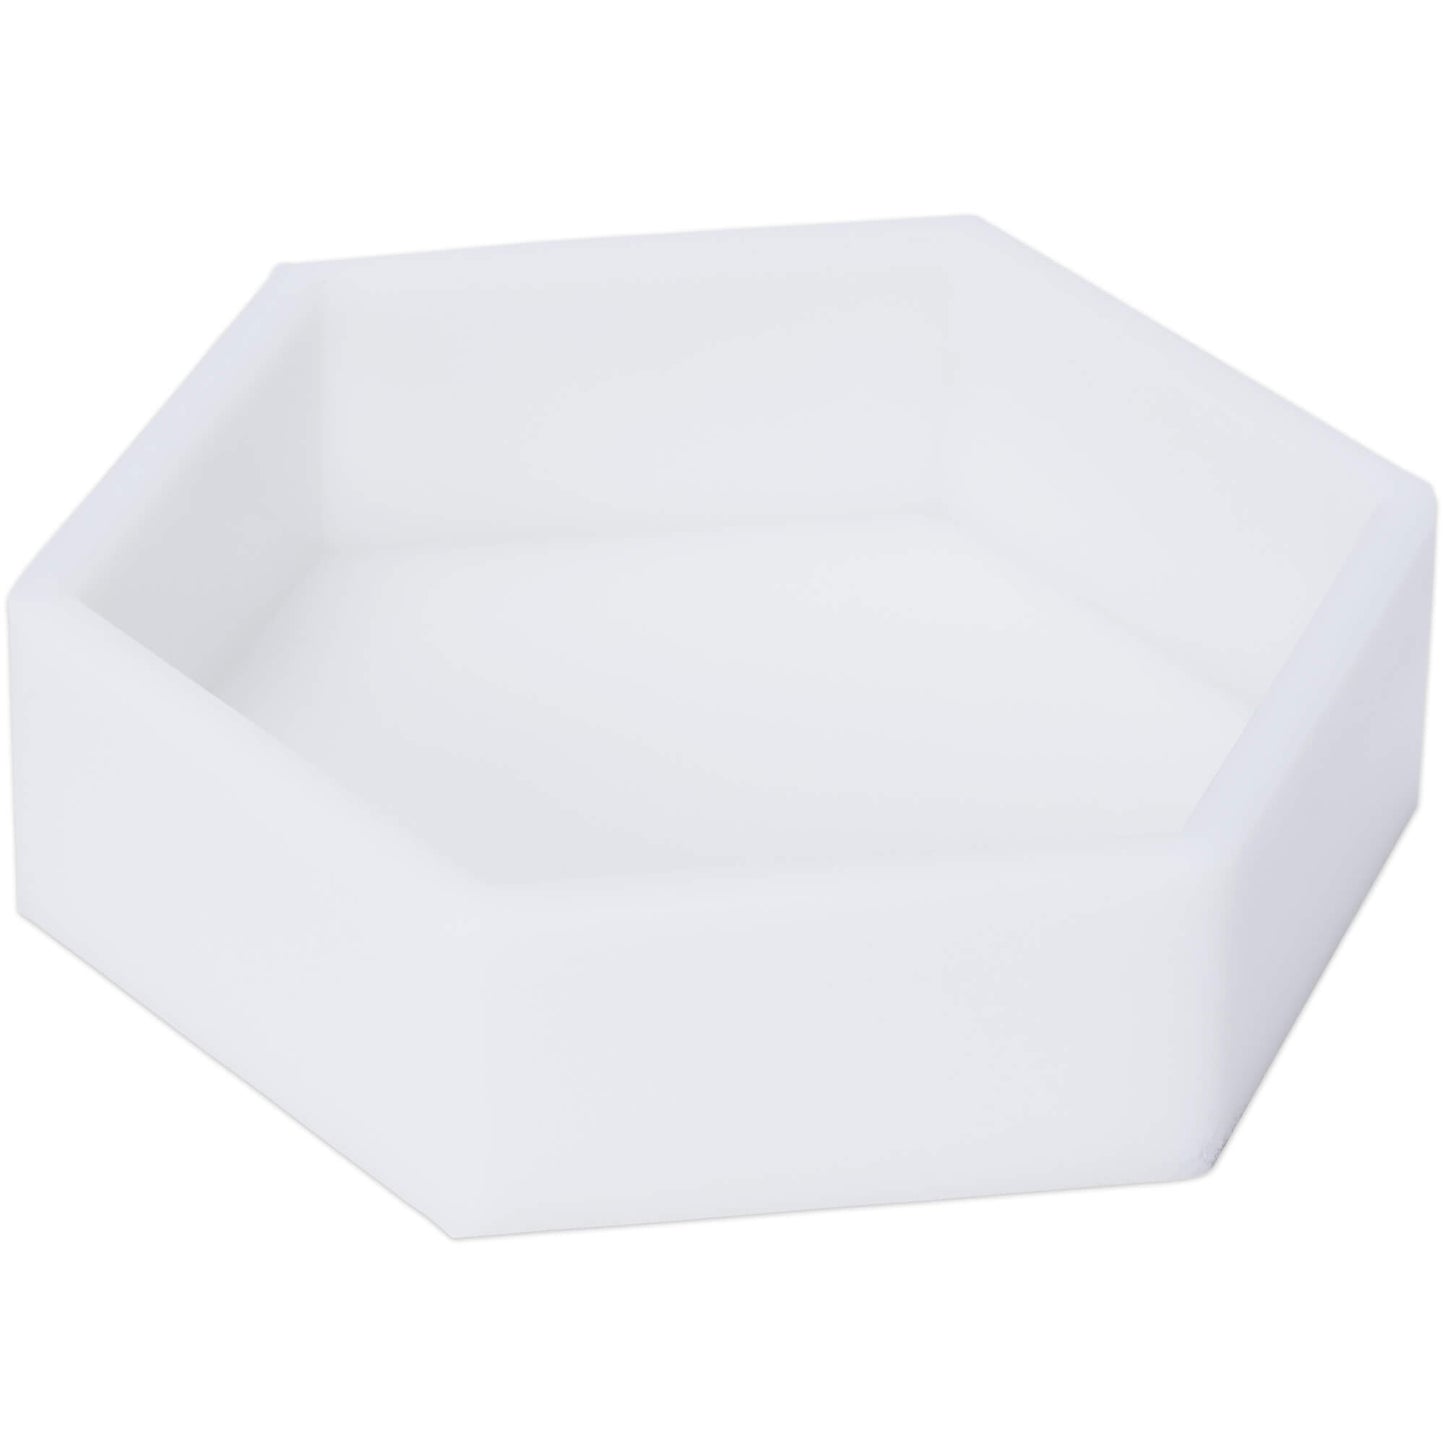 Large Silicone Hexagon Mold for Resin